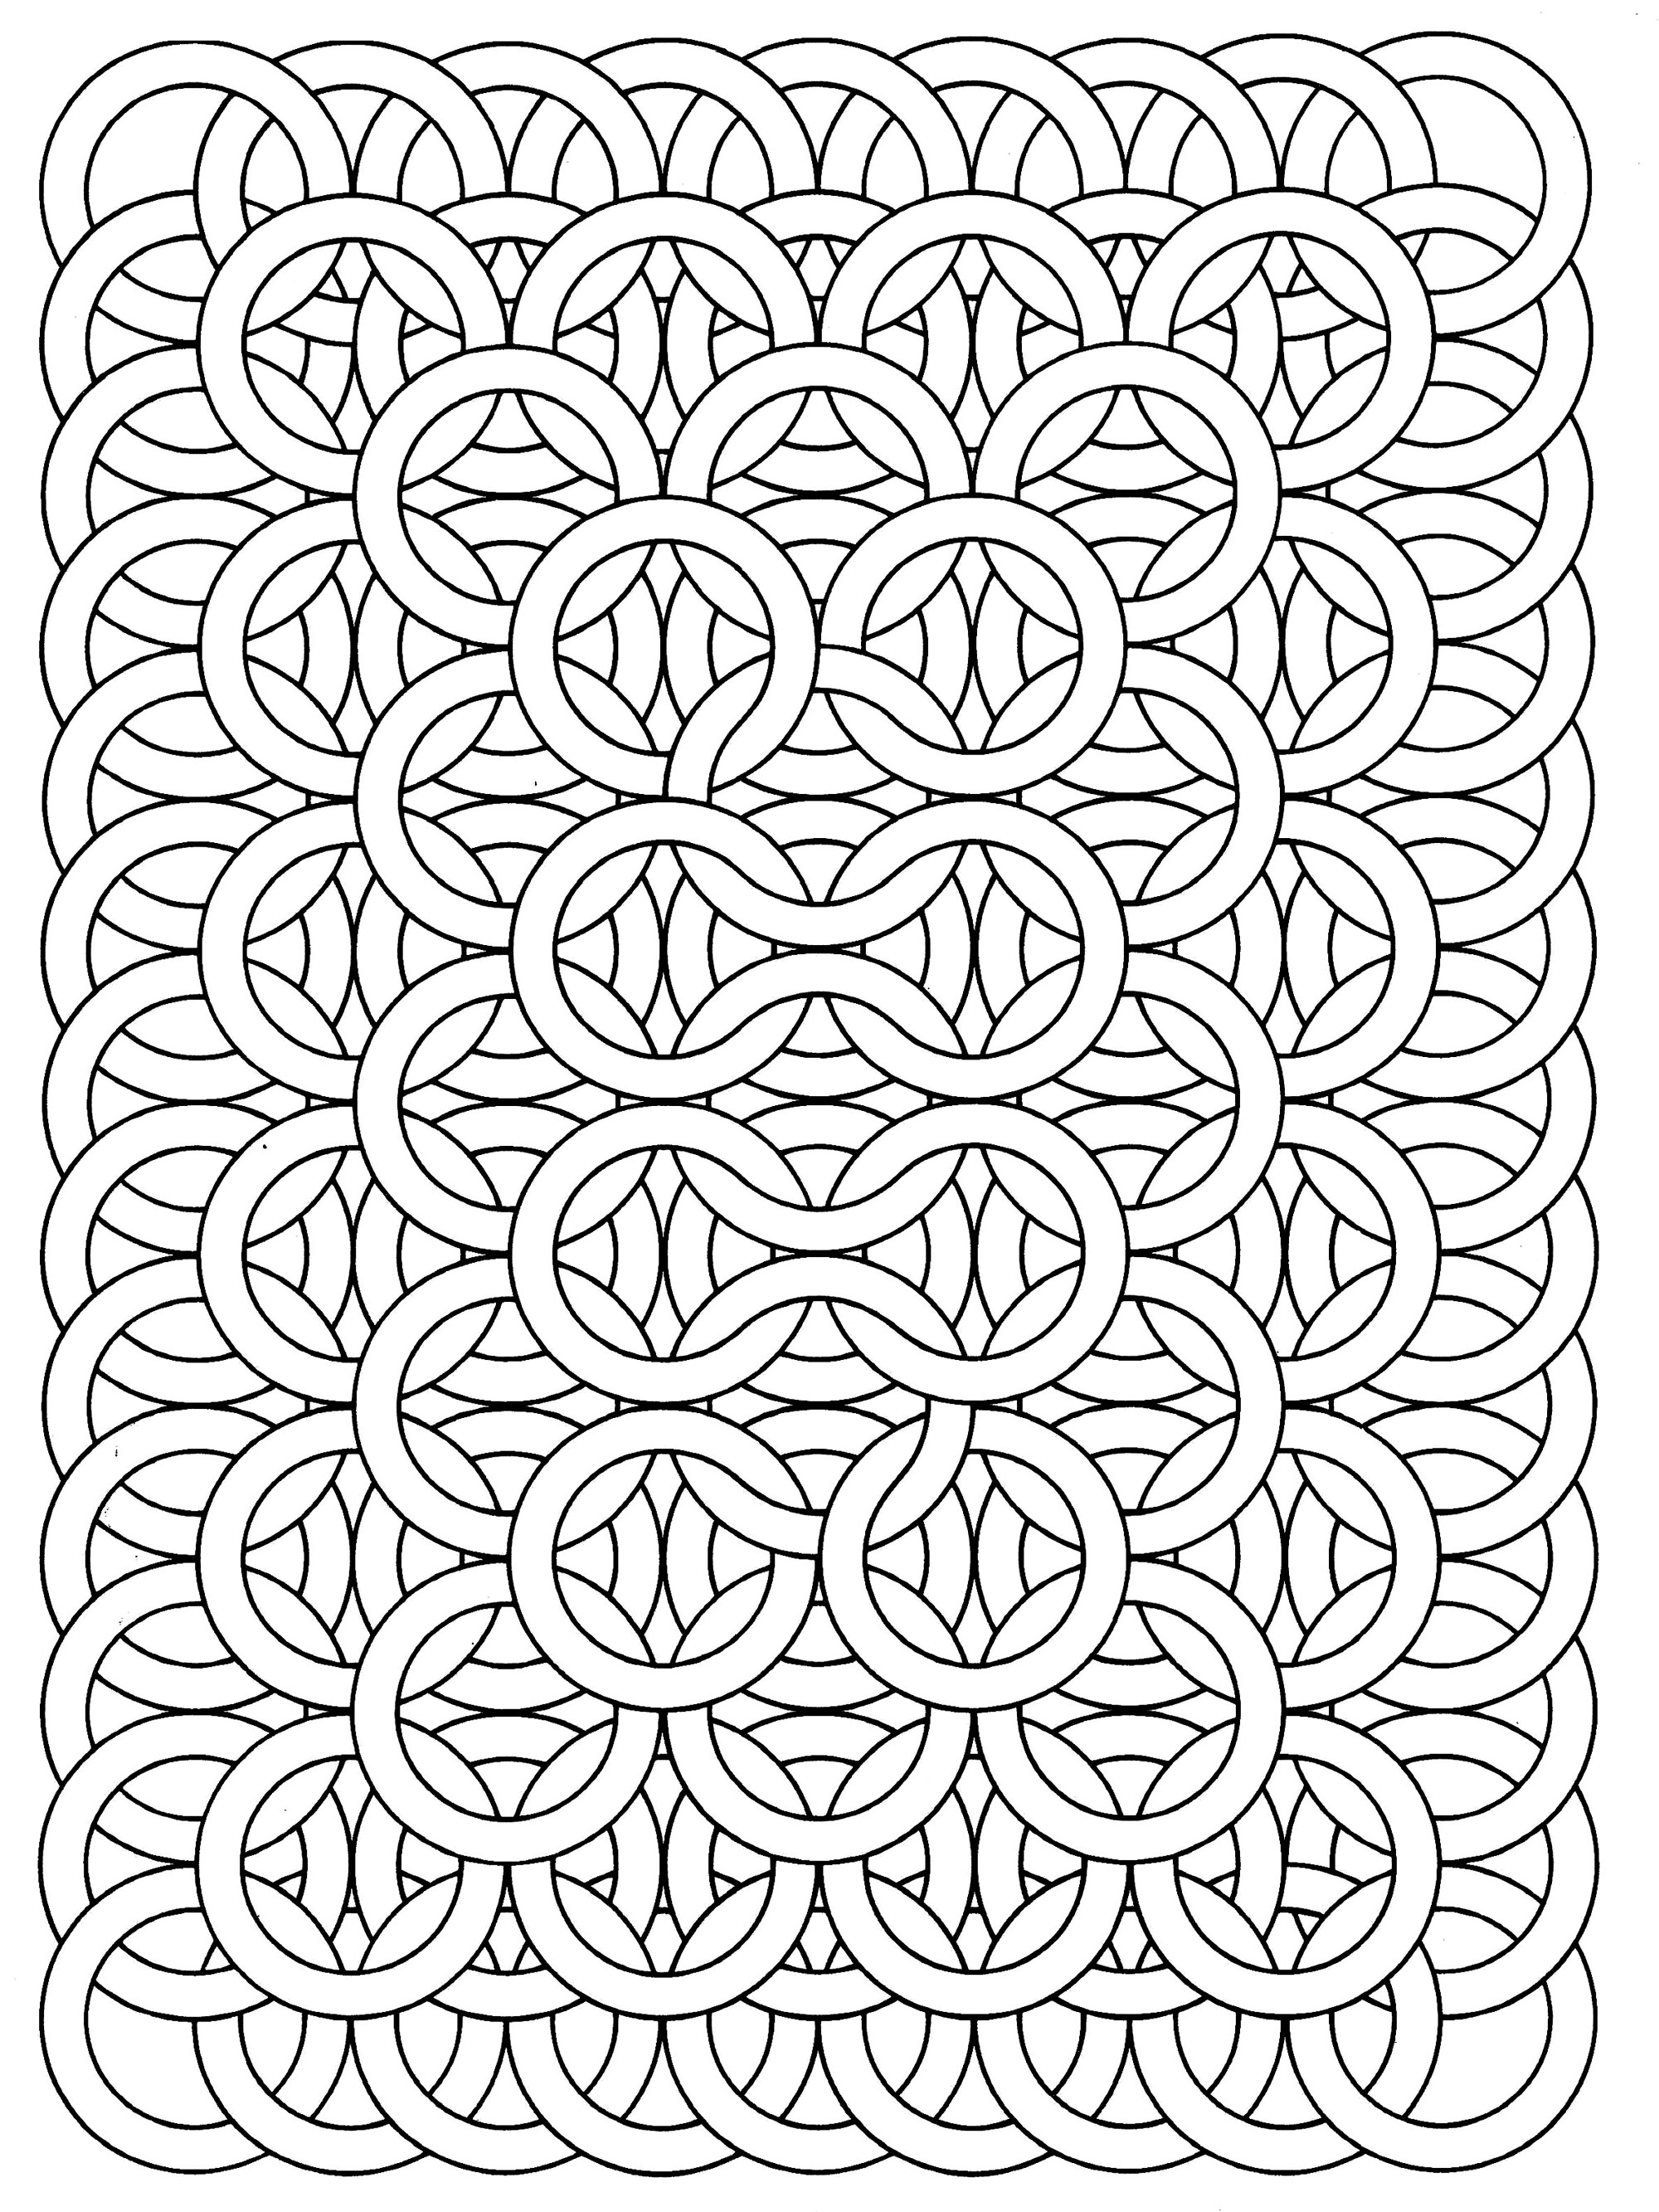 FREE Adult Coloring Pages Happiness Is Homemade